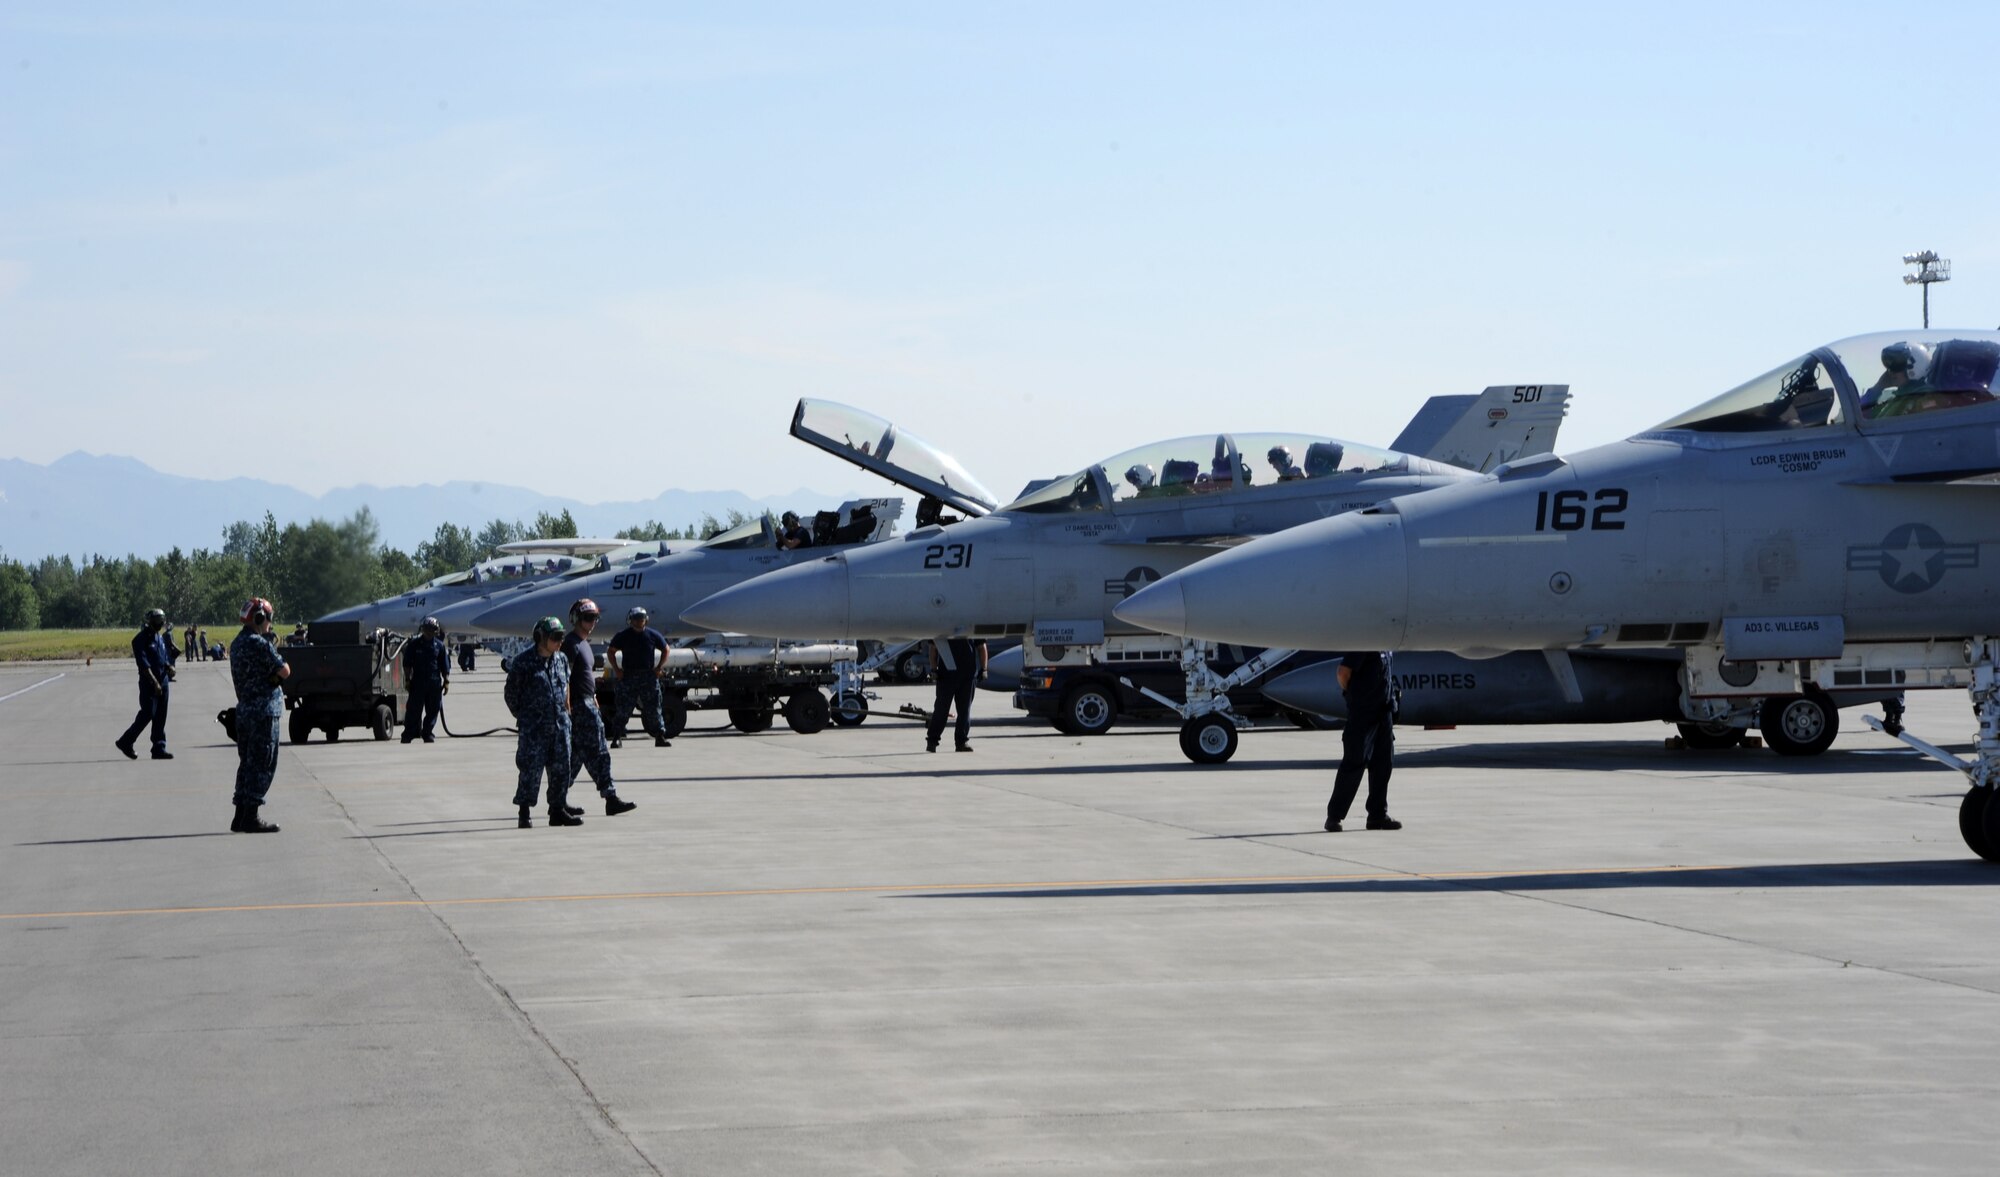 Crew members prepare a U.S. Navy F/A-18F Super Hornet from Air Test Squadron, China Lake, California,  prepare aircraft to launch for a mission during Exercise Northern Edge 15 from Joint Base Elmendorf-Richardson, Alaska, June 19, 2015. Northern Edge 15 is Alaska’s premier joint training exercise designed to practice operations, techniques and procedures as well as enhance interoperability among the services. Thousands of participants from all services, from active duty, Reserve and National Guard units, are involved. (U.S. Air Force photo by Staff Sgt. William Banton/Released)‪